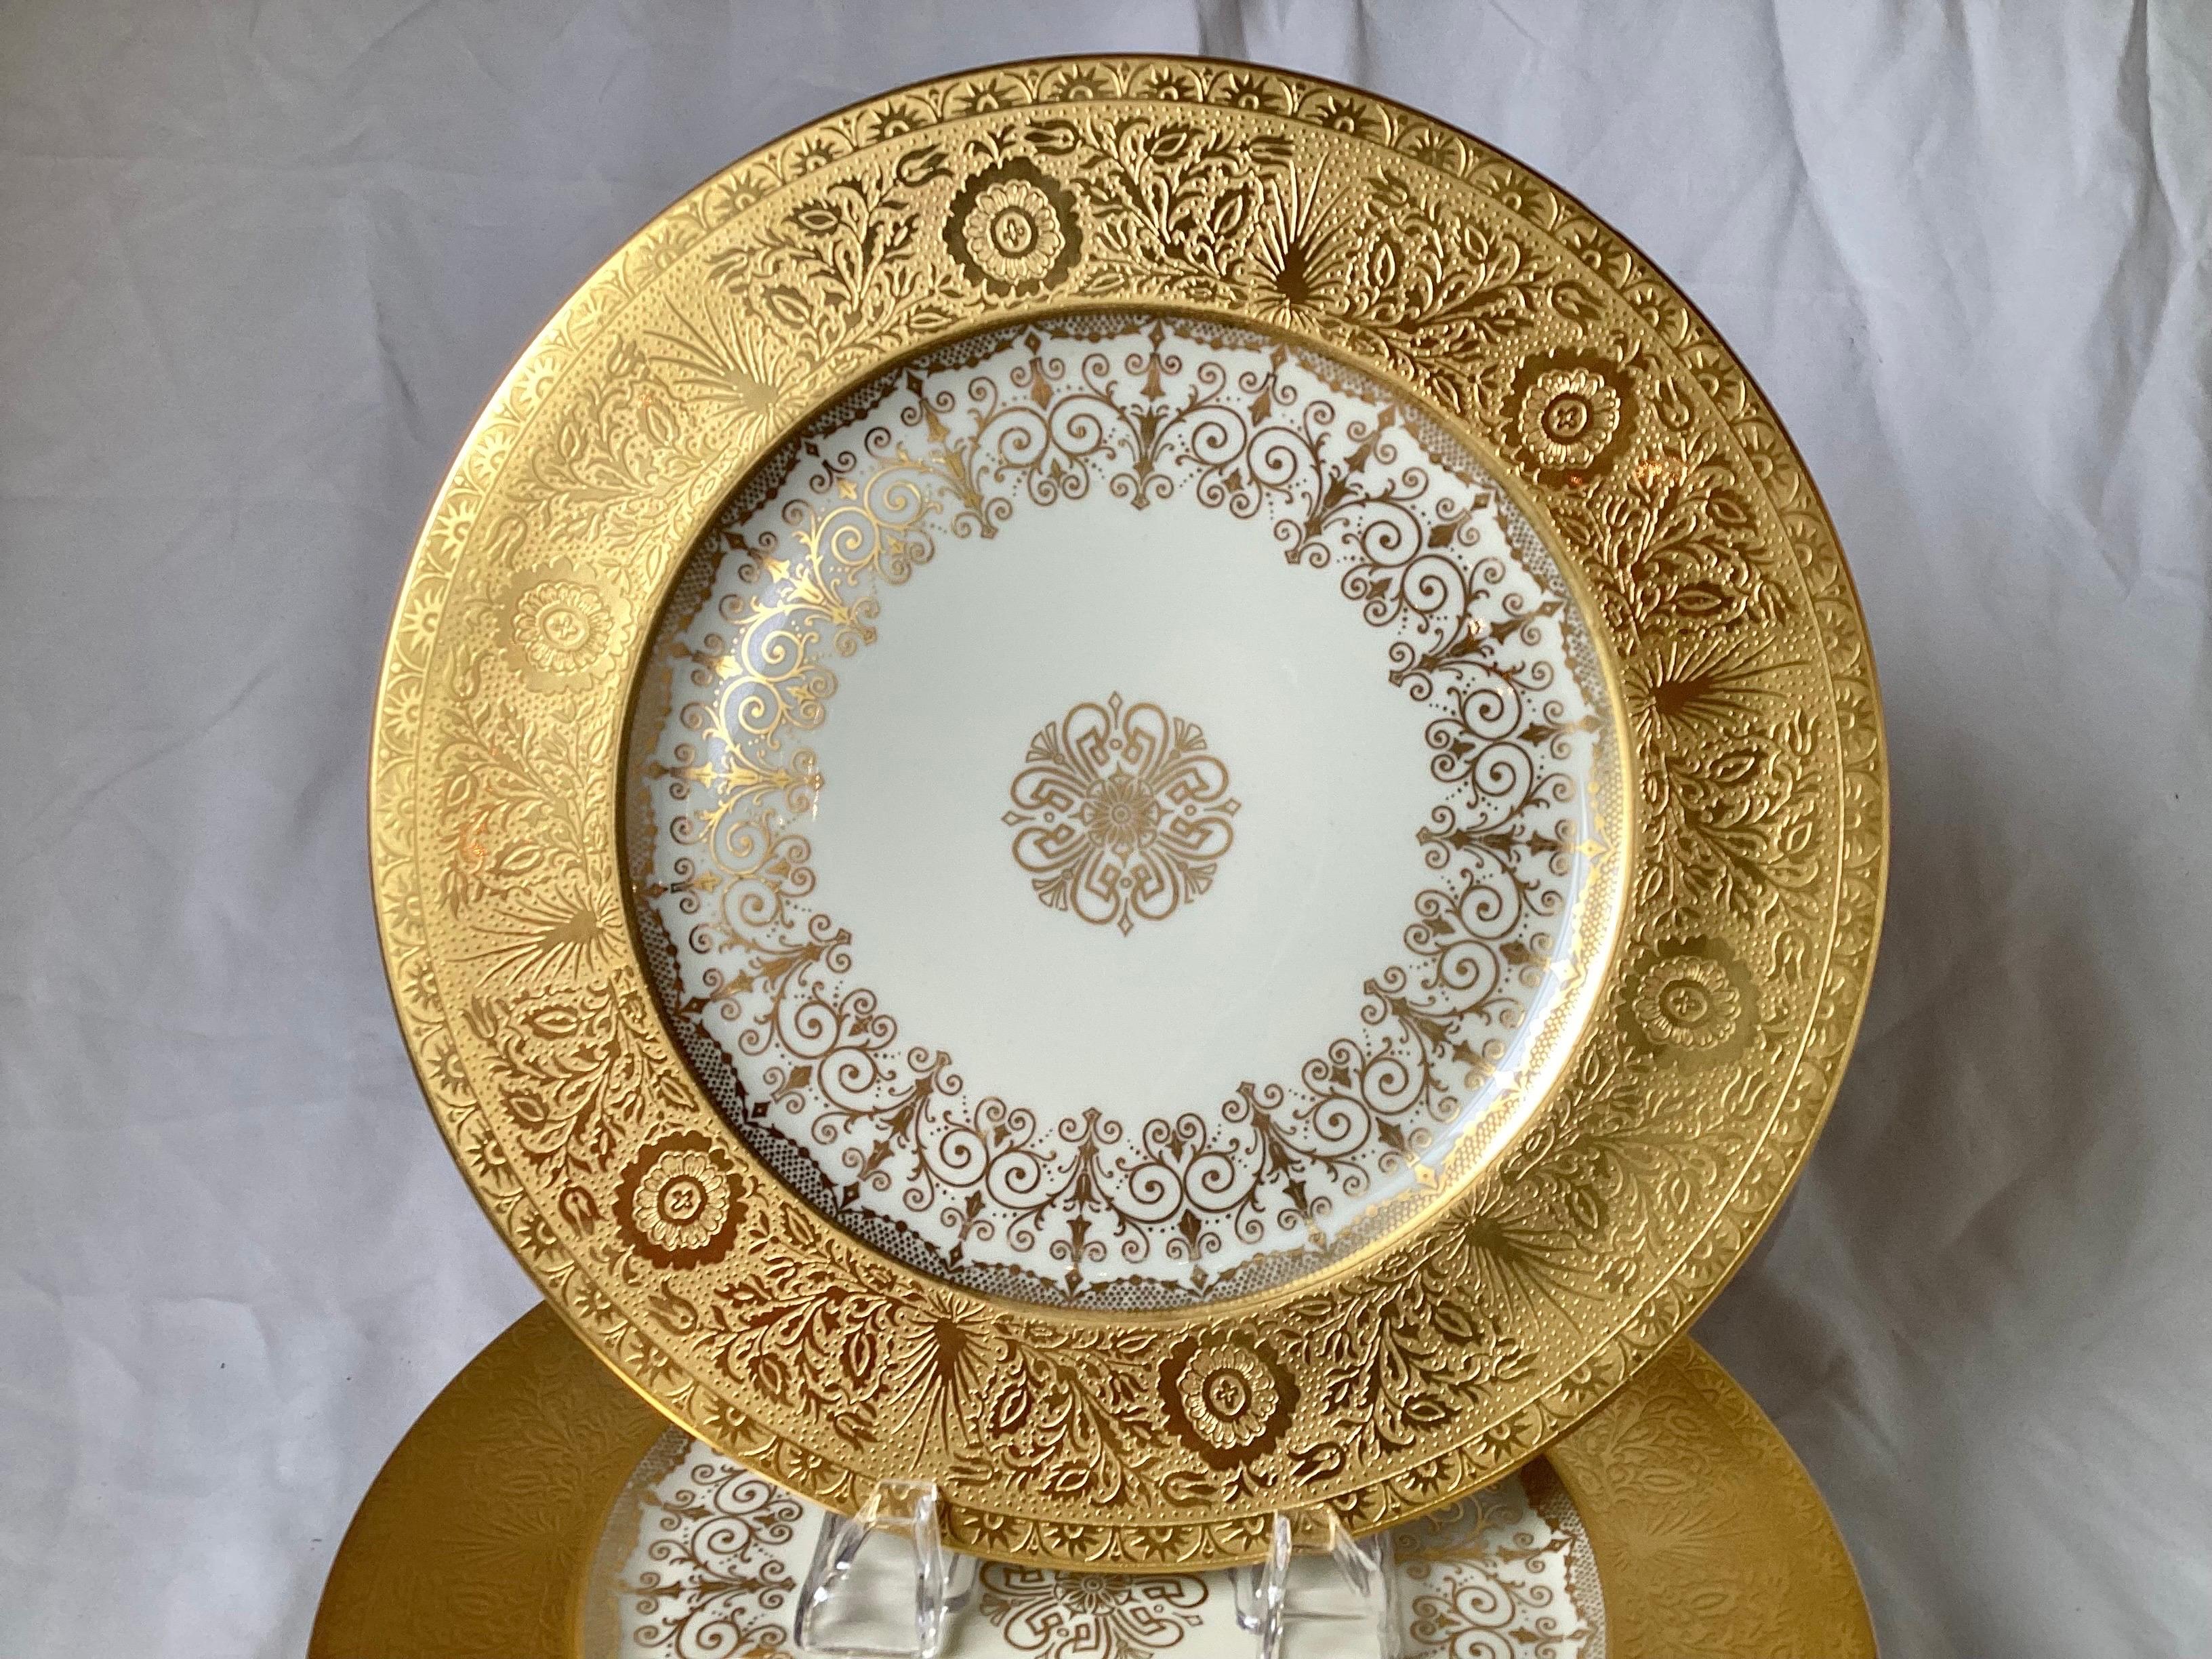 A set of eight opulent heavy gold encrusted service plates. The broad gold borders with center gilt decoration, each is 11 inches in diameter.